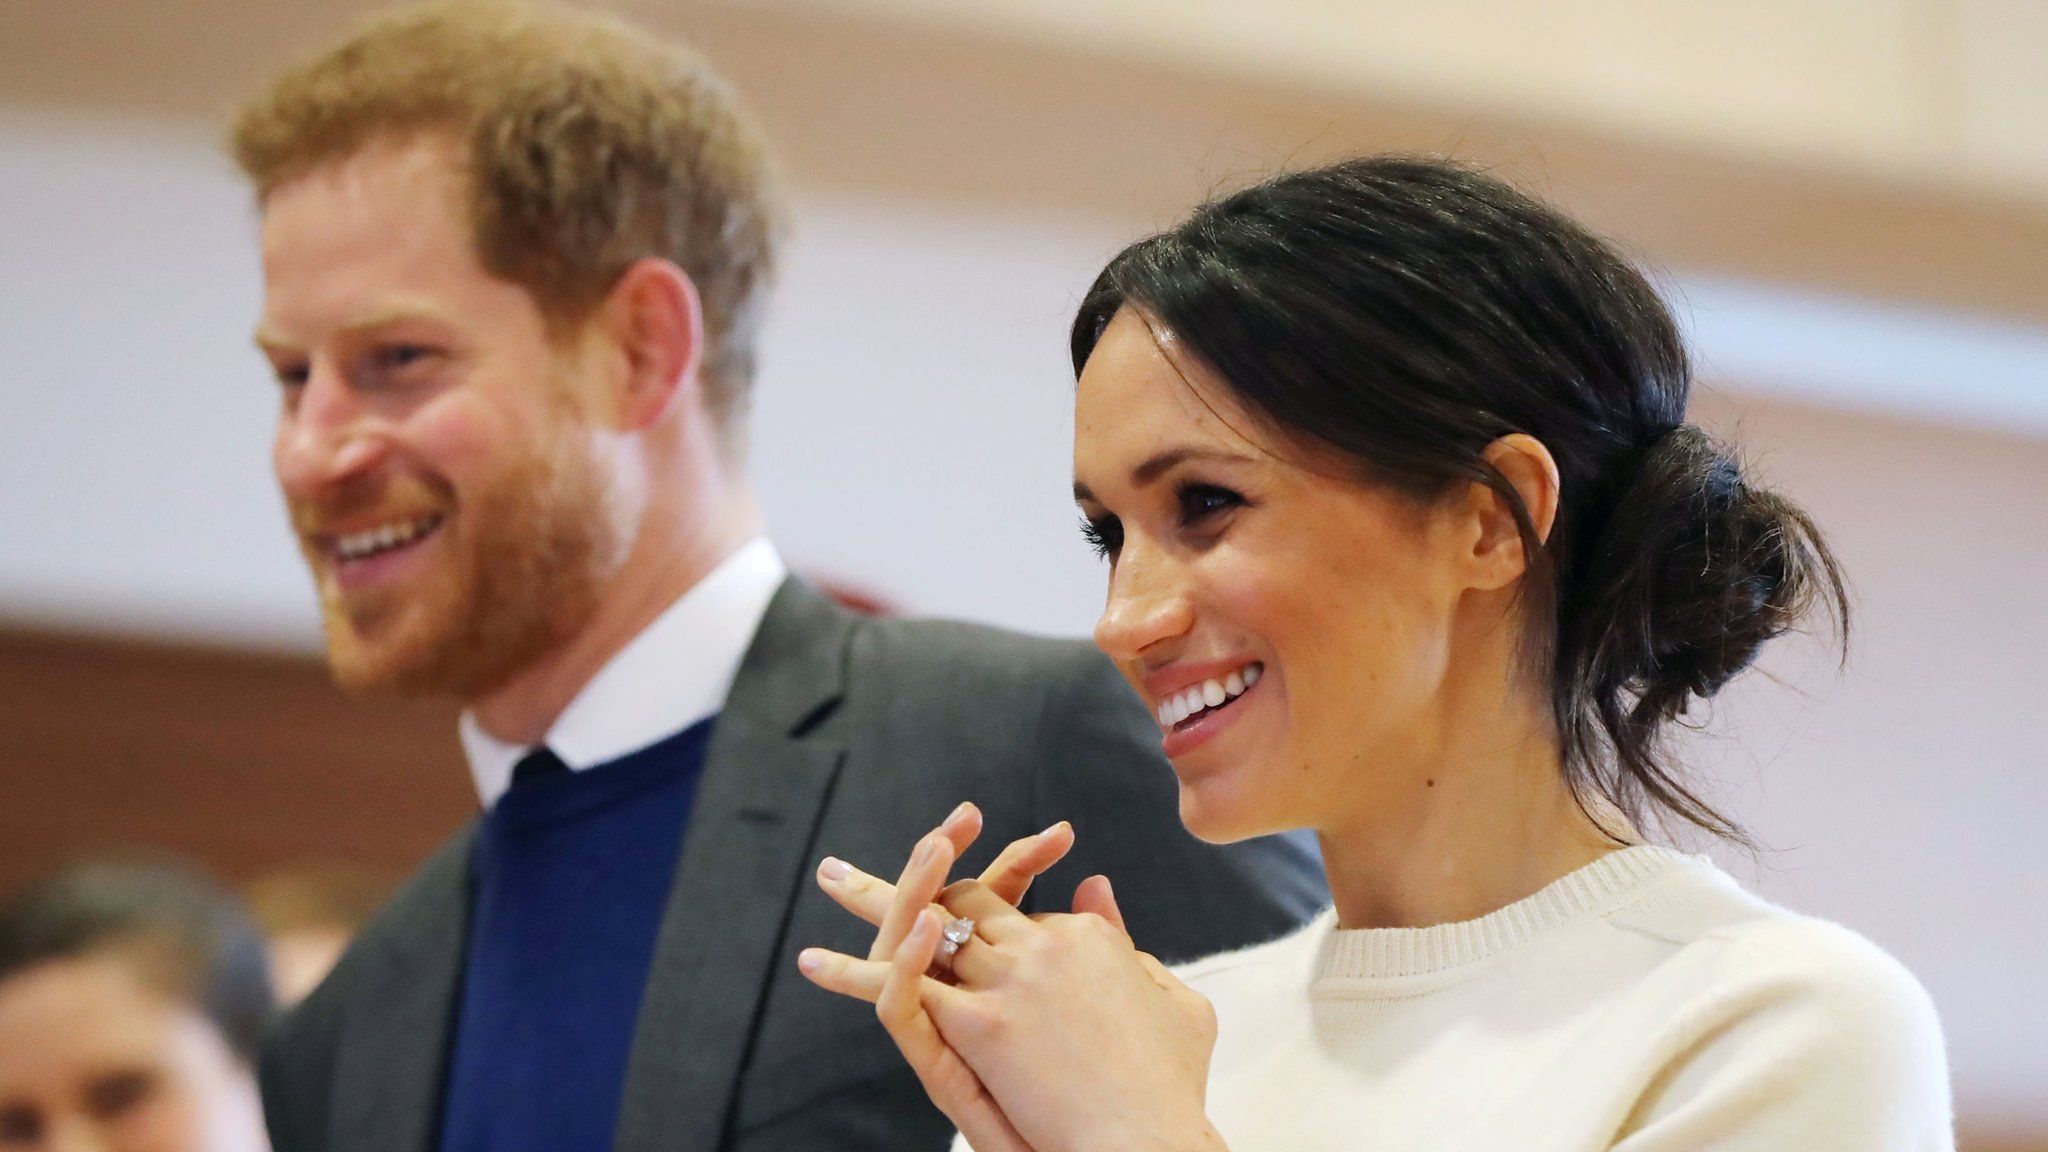 Prince Harry and Meghan Markle in Belfast on 23 March 2018